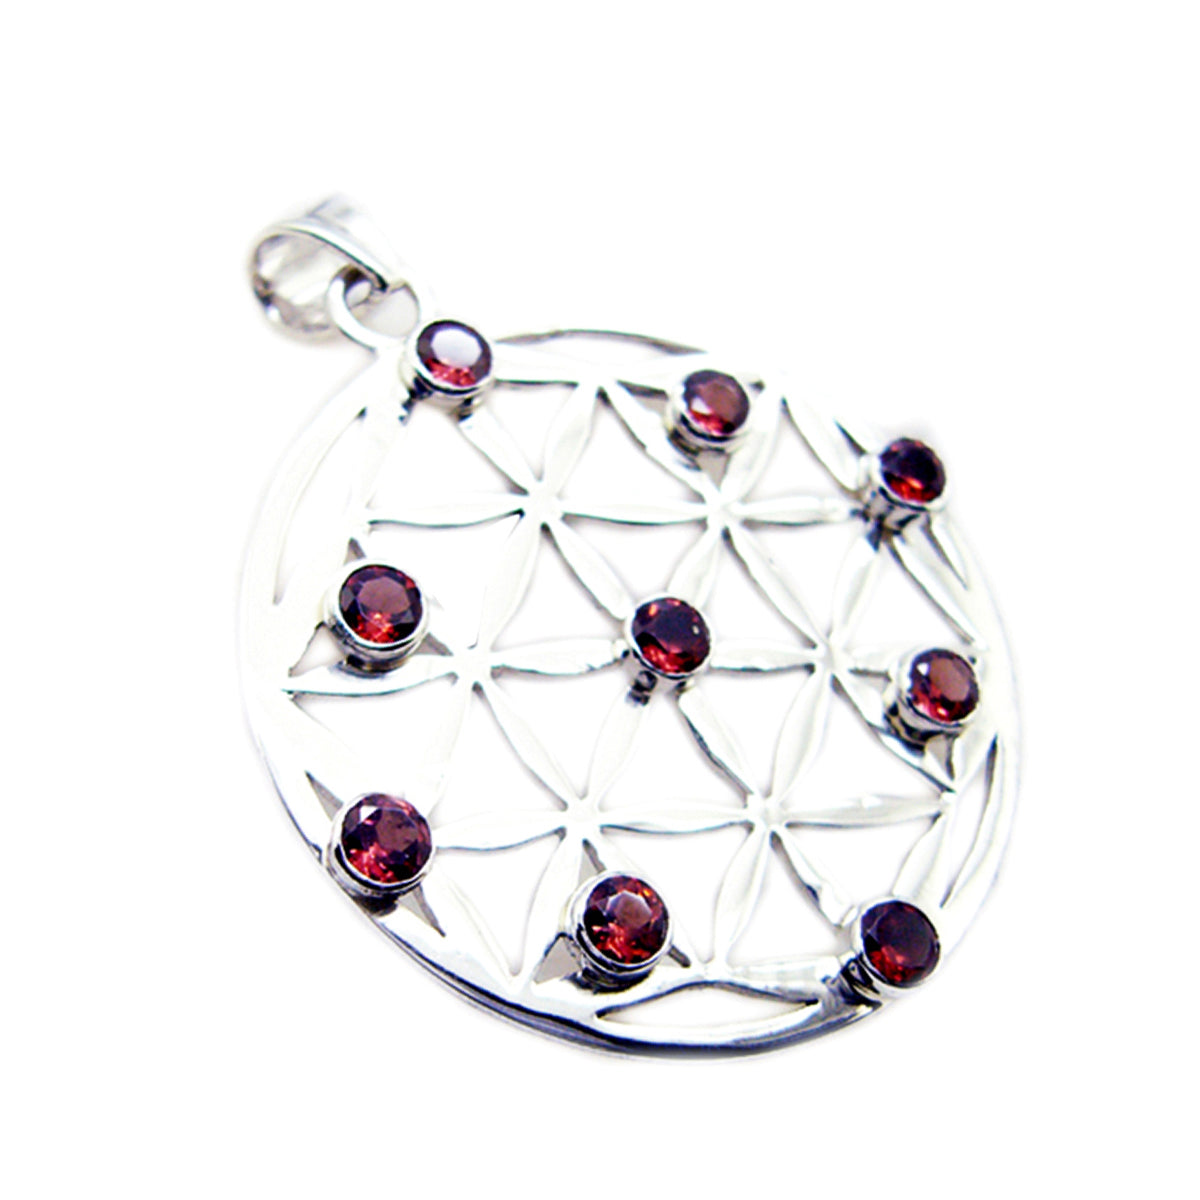 Riyo Decorative Gemstone Round Faceted Red Garnet 1014 Sterling Silver Pendant Gift For Good Friday